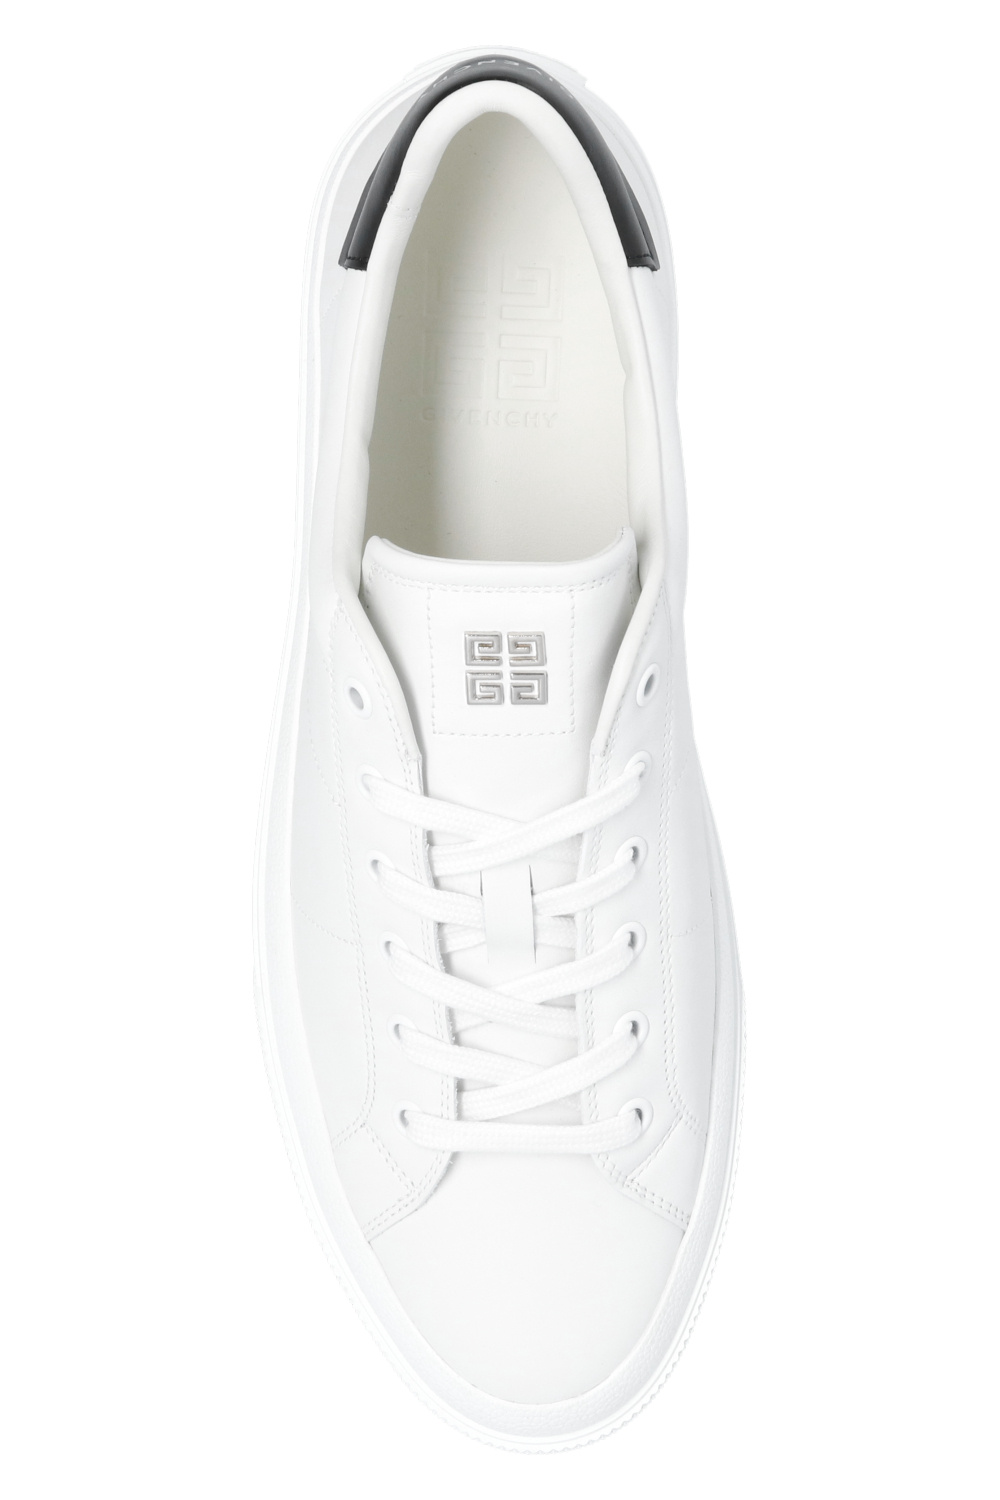 Givenchy 'New City' sneakers | Men's Shoes | Vitkac